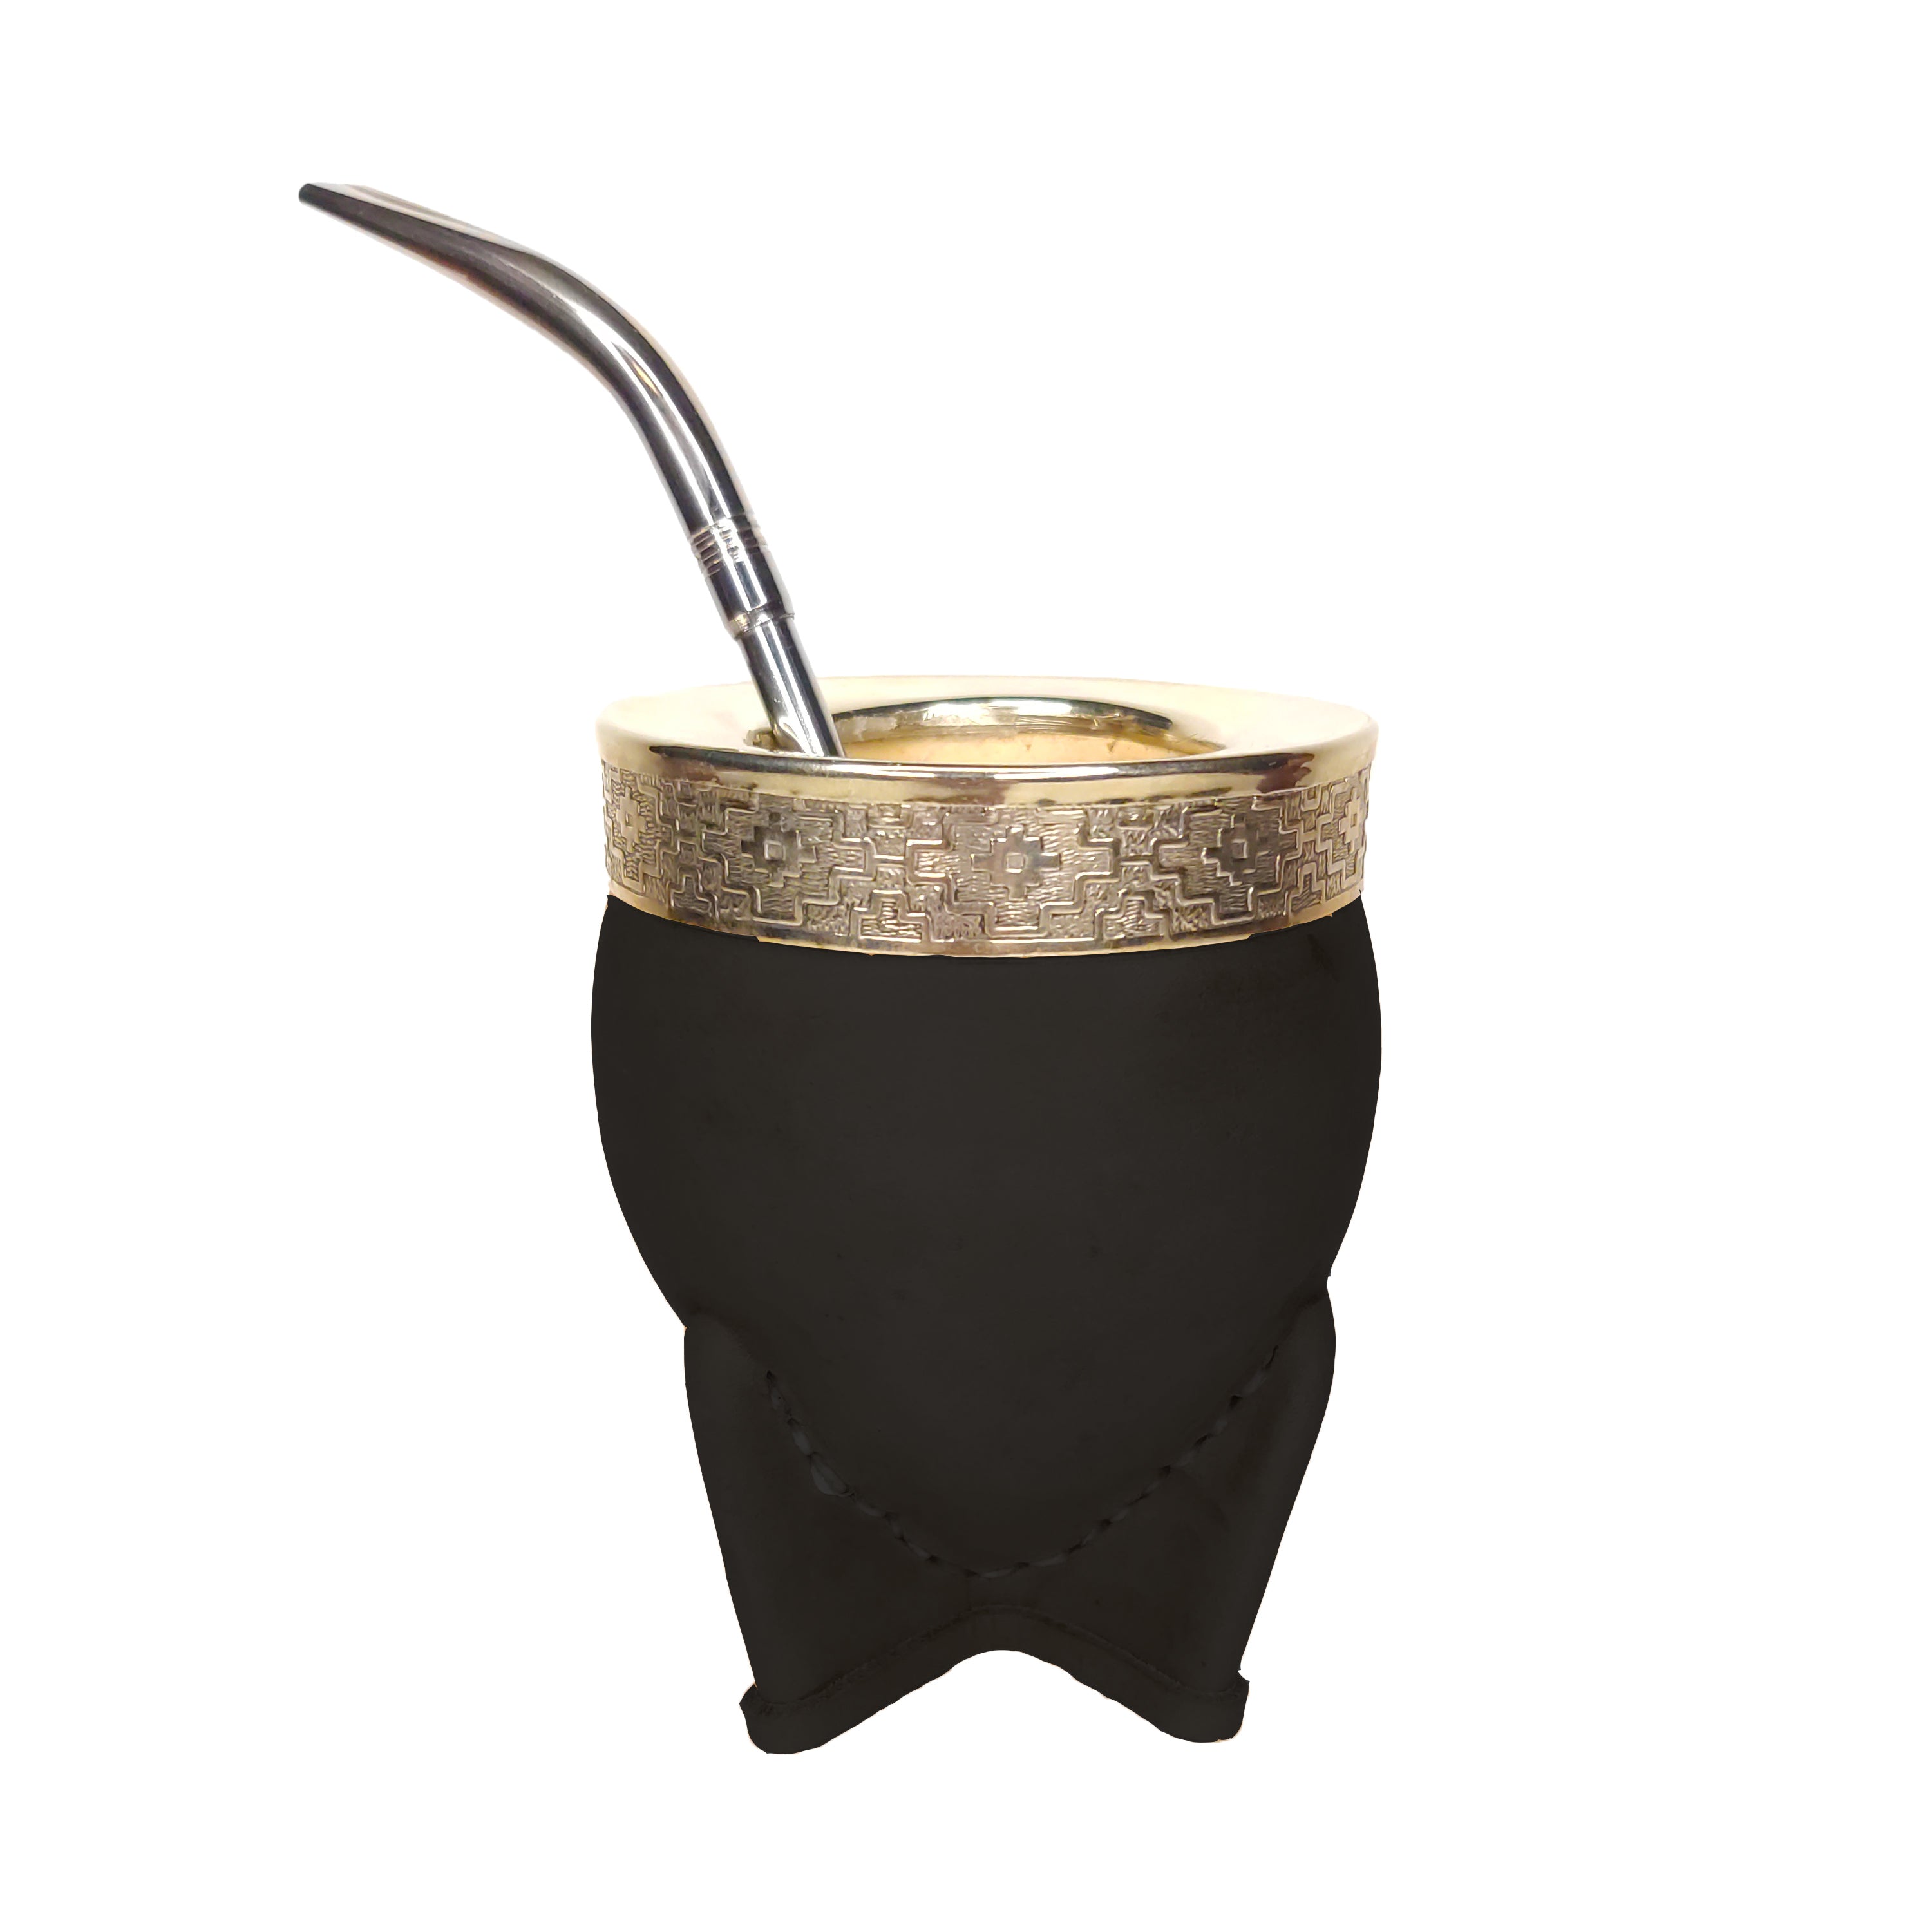 Mate Imperial alpaca NEGRO - Artisan Imperial Mate Cup BLACK Leather